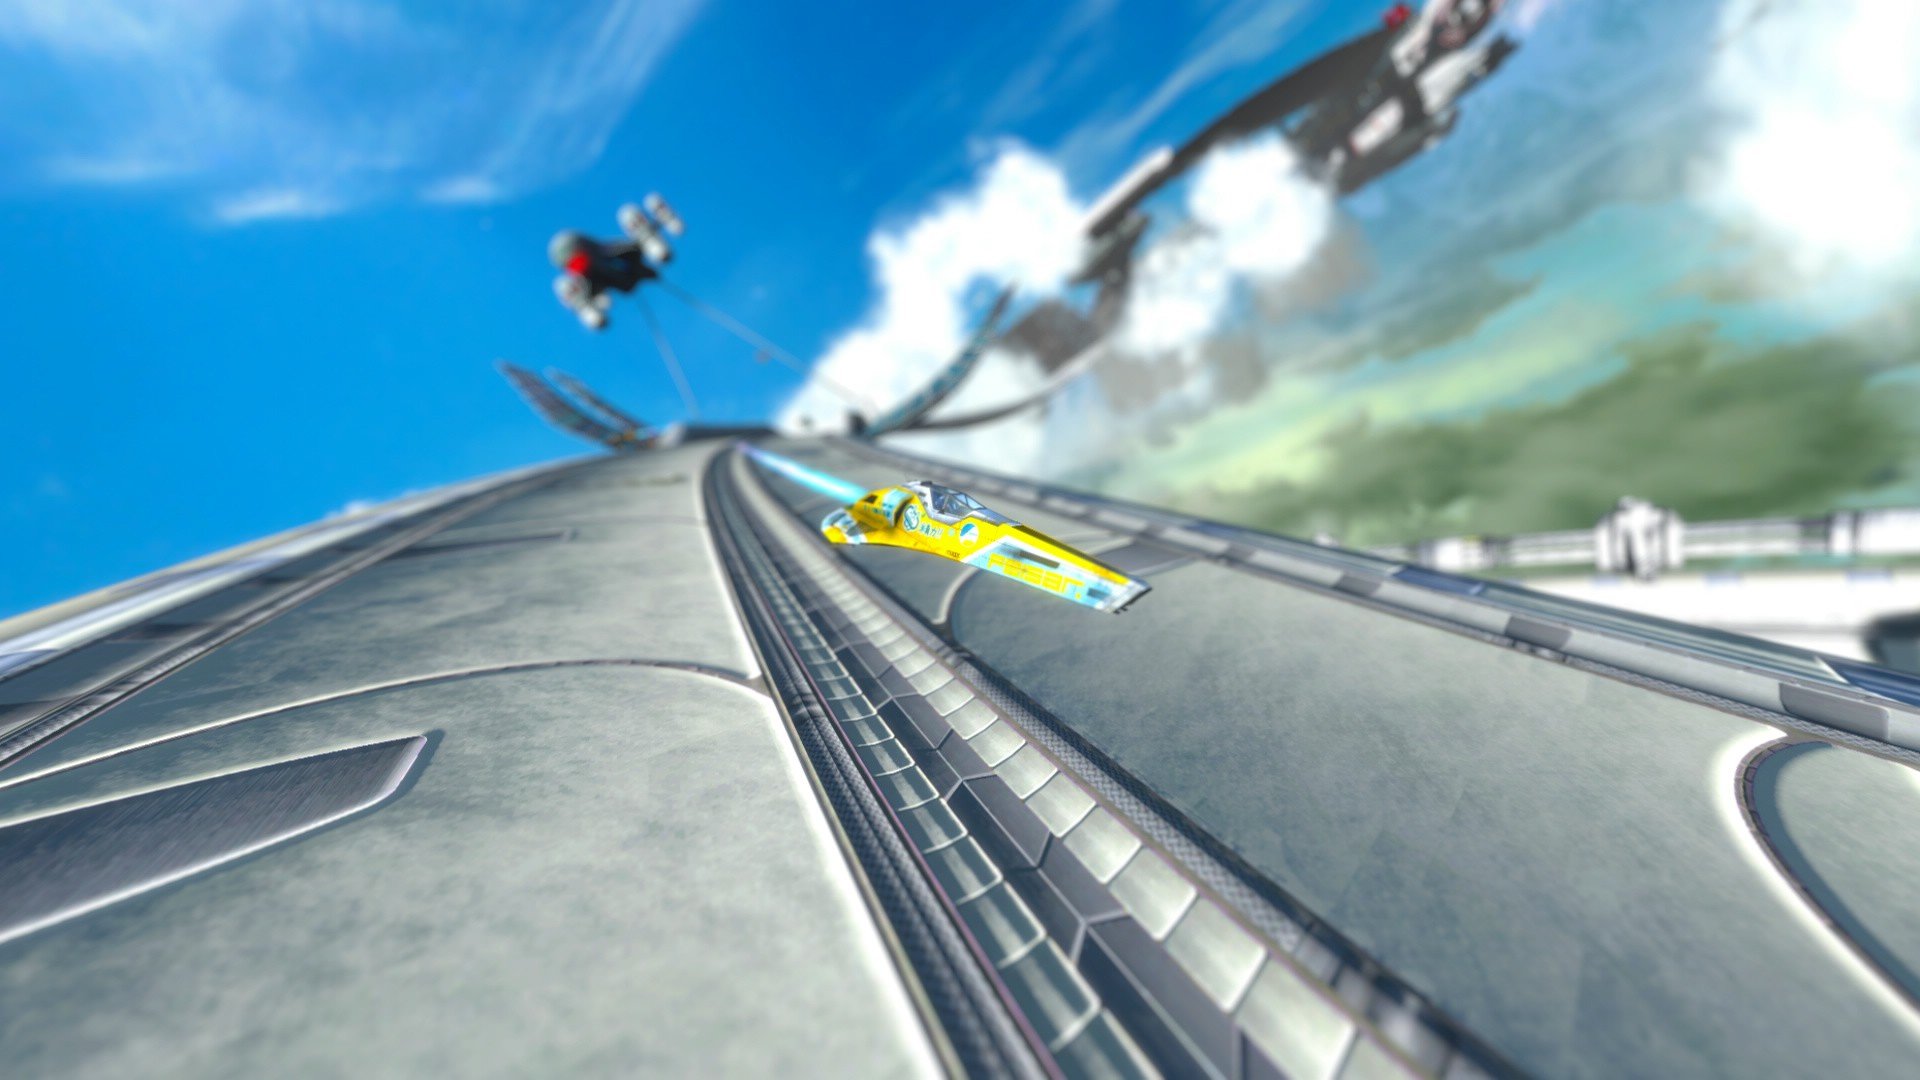 Wipeout Wipeout Hd Racing Playstation 3 Futuristic Wallpapers Hd Desktop And Mobile Backgrounds